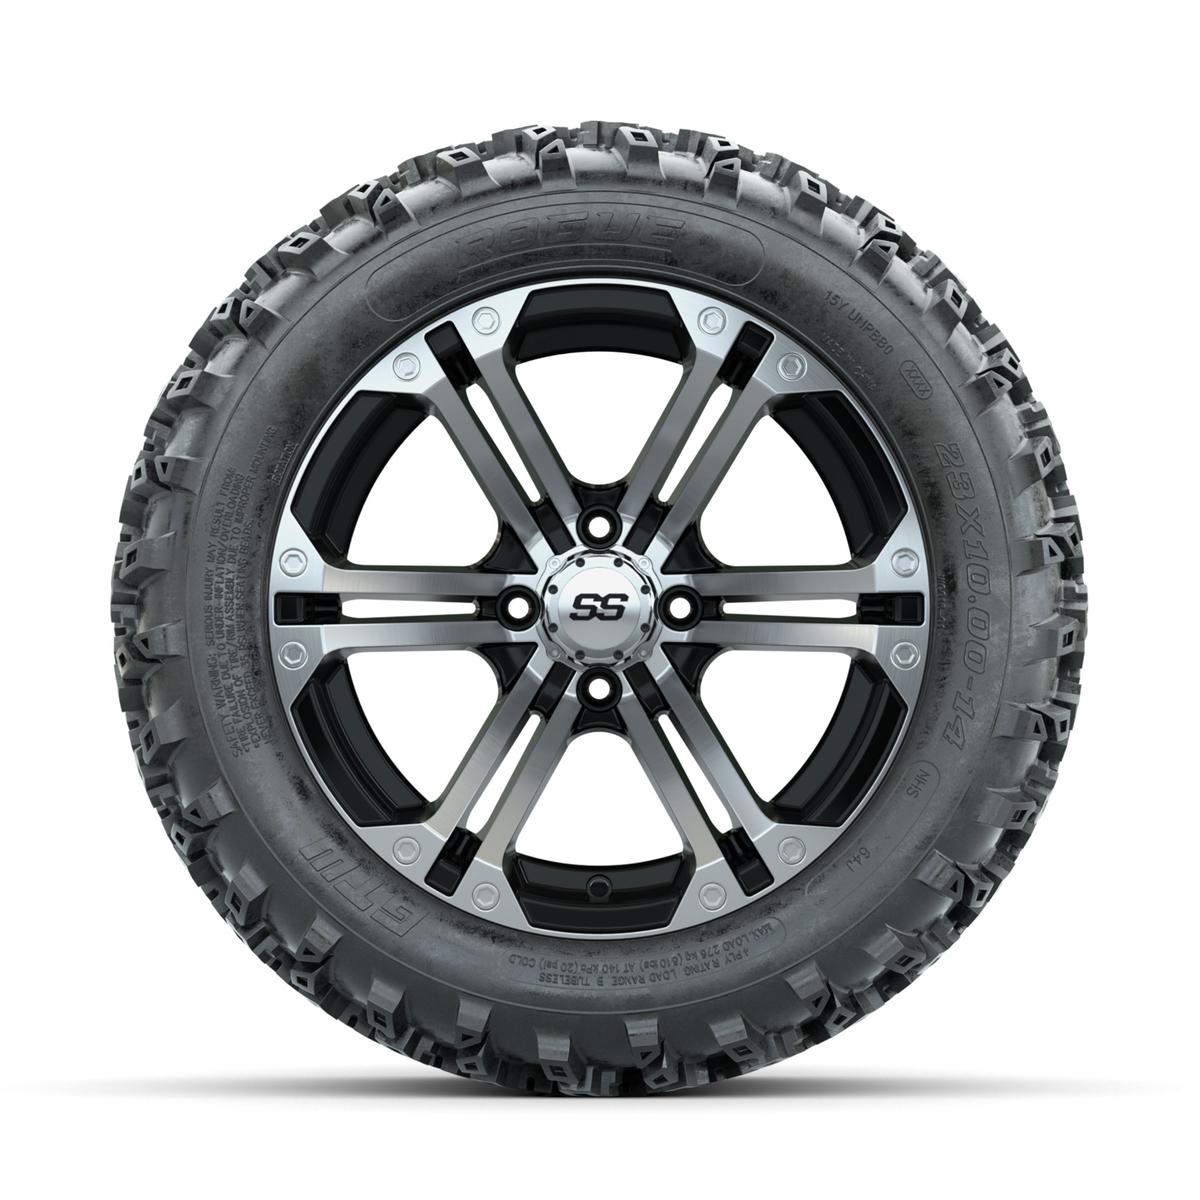 GTW Specter Machined/Black 14 in Wheels with 23x10.00-14 Rogue All Terrain Tires – Full Set